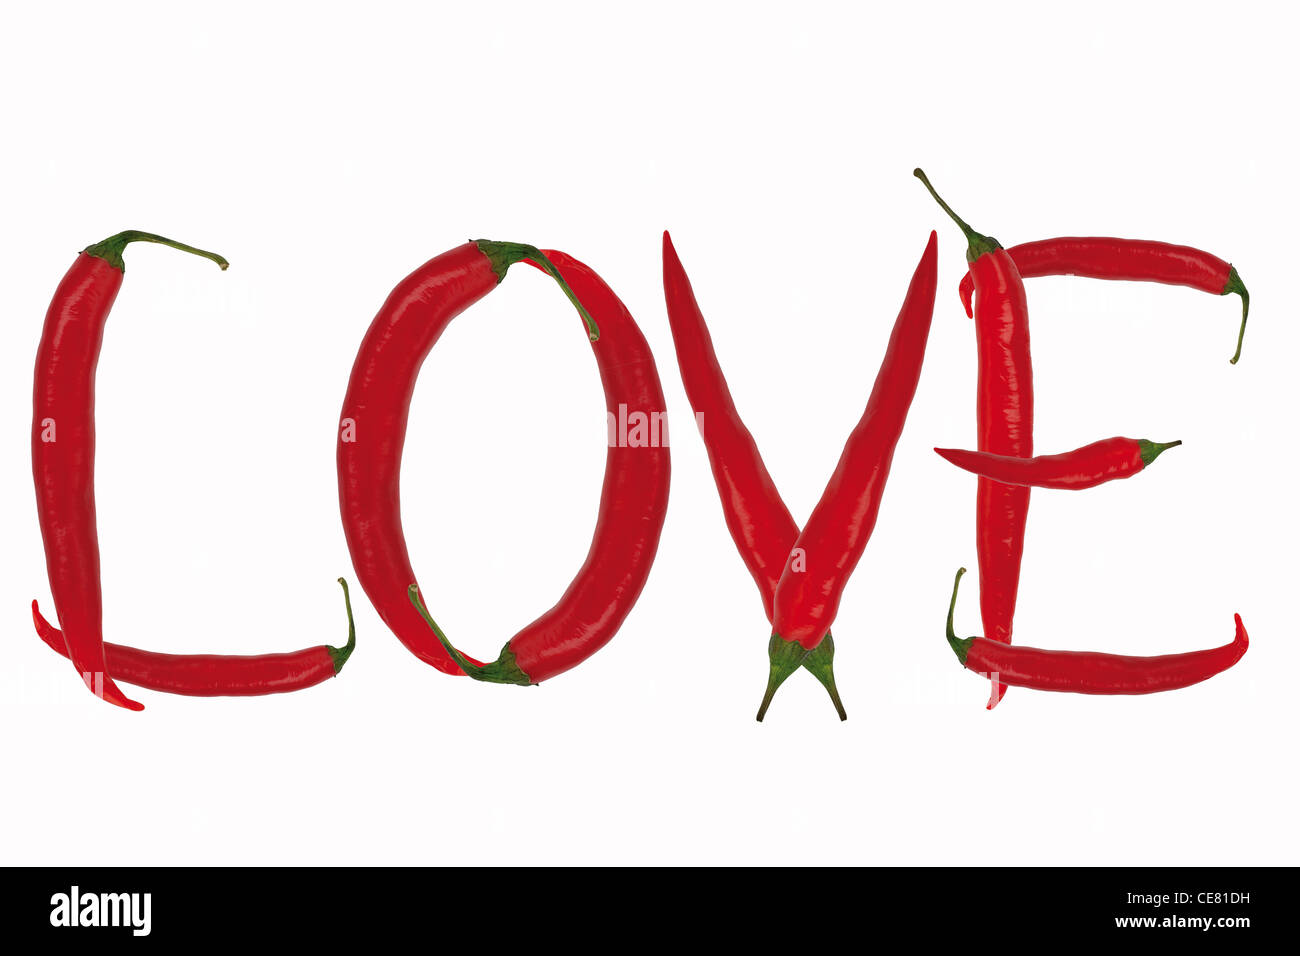 inscription love made from red chili peppers isolated on white background Stock Photo